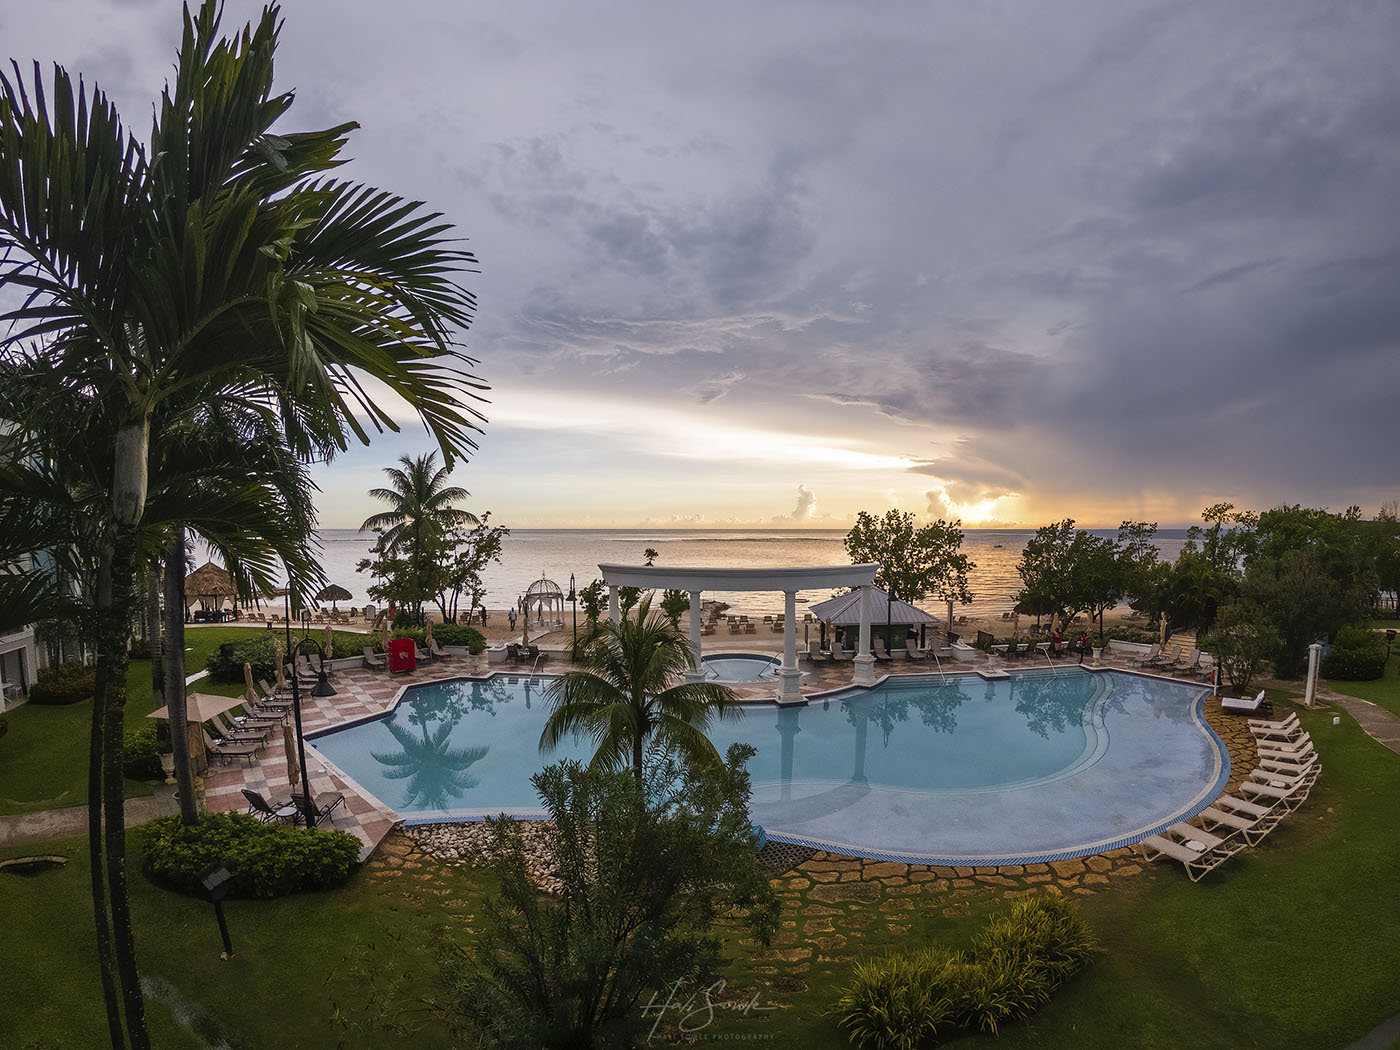 2019_09_Sandals-SouthCoast-10026_Edit1000.jpg - Sunset from our room on the first full day we were there.  Taken with our GoPro.  The GoPro got a lot of work on this vacation, from sailing to sunsets and snorkling as well as walks on the beach.